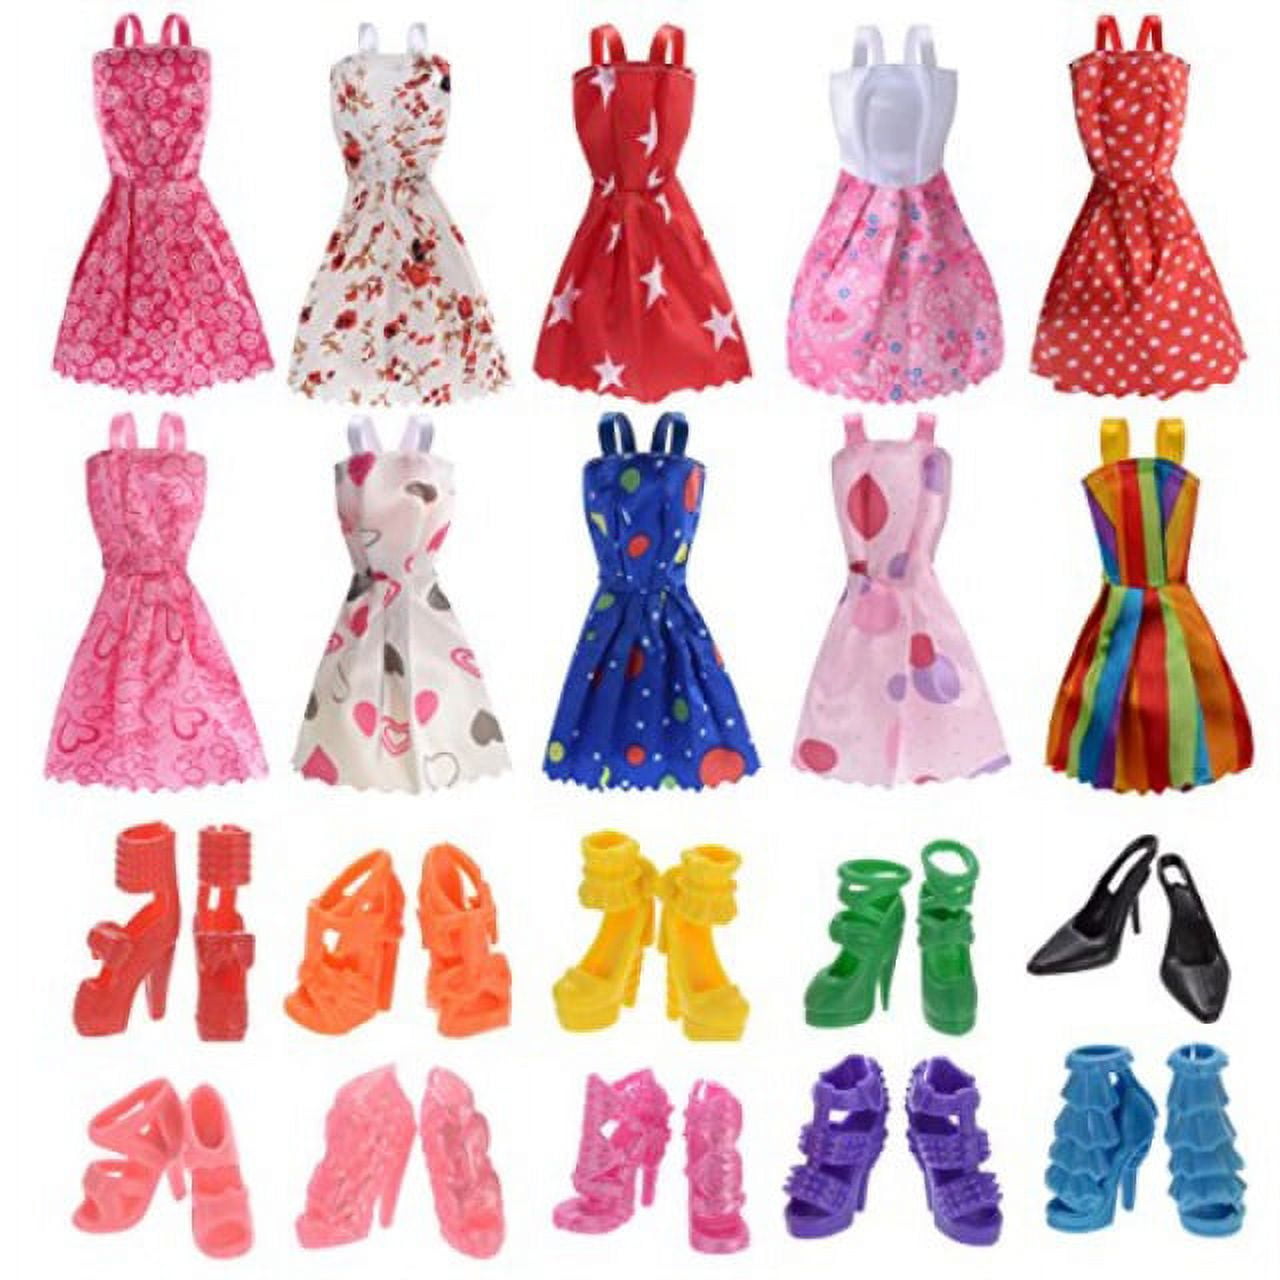 Doll Clothes for Barbie Dresses Gown with Shoes Outfit Set for Xmas Birthday Gift(20 Pack)